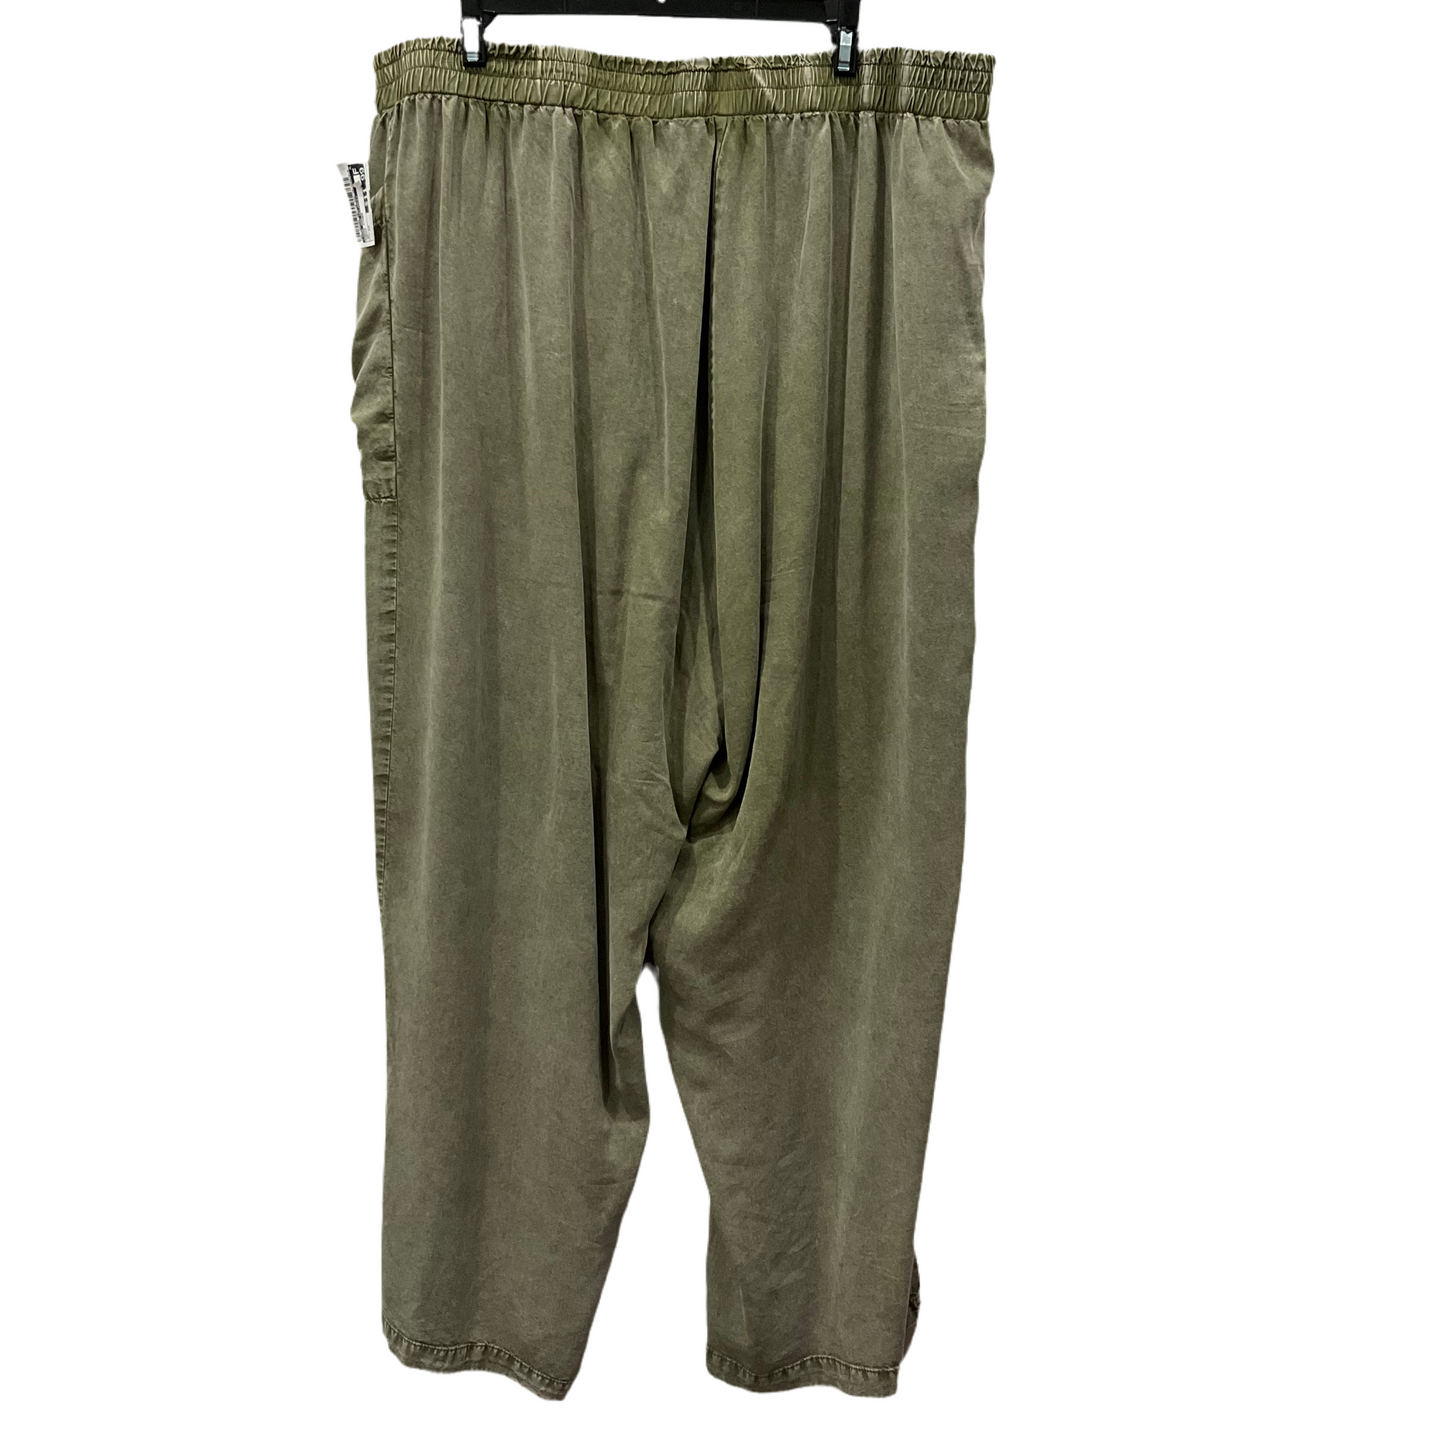 Green Pants Other Jane And Delancey, Size 2x